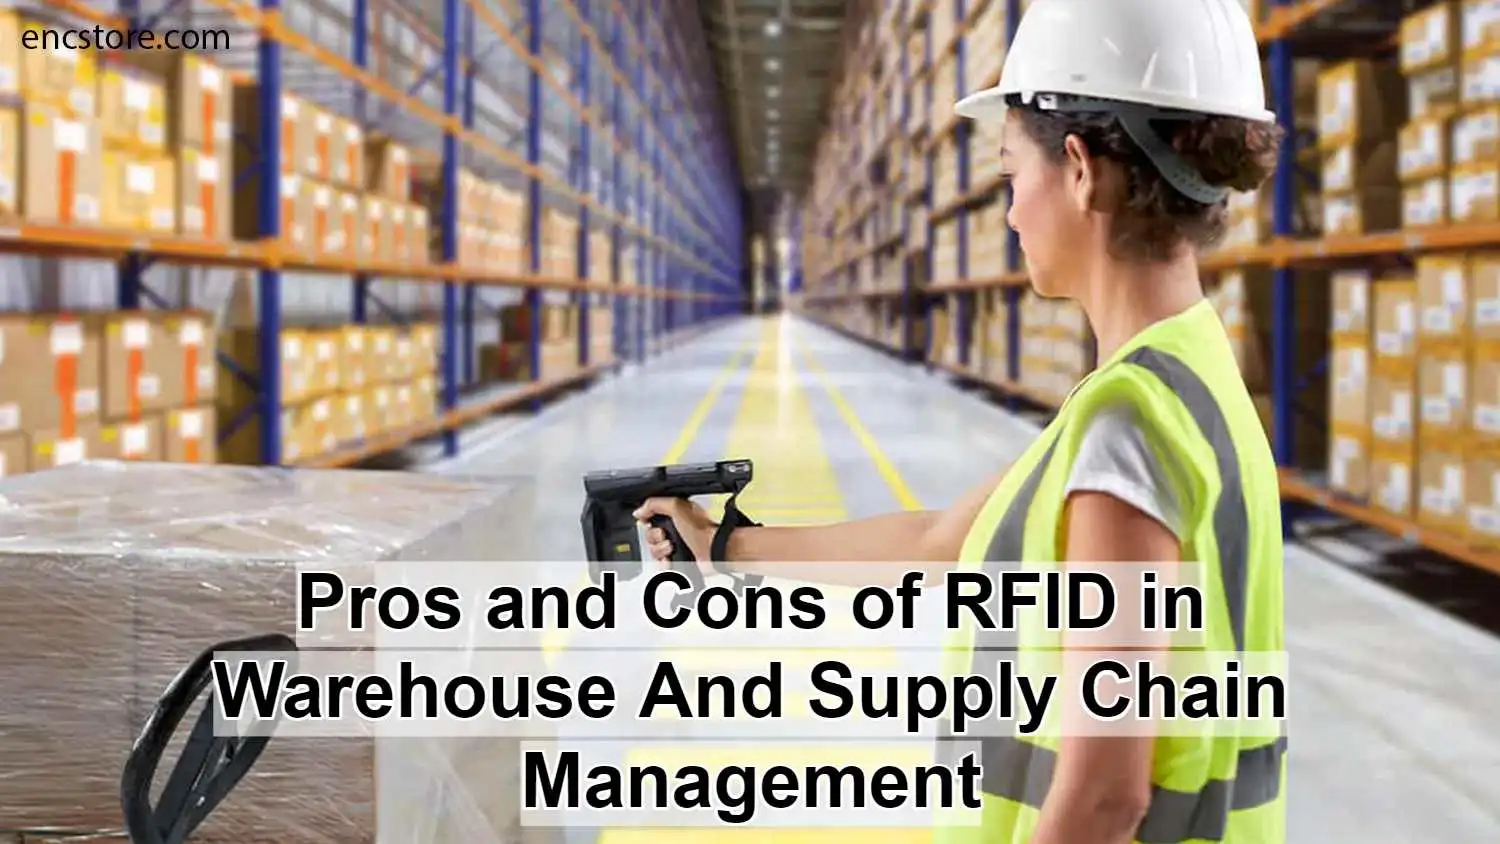 Pros and Cons of RFID in Warehouse And Supply Chain Management